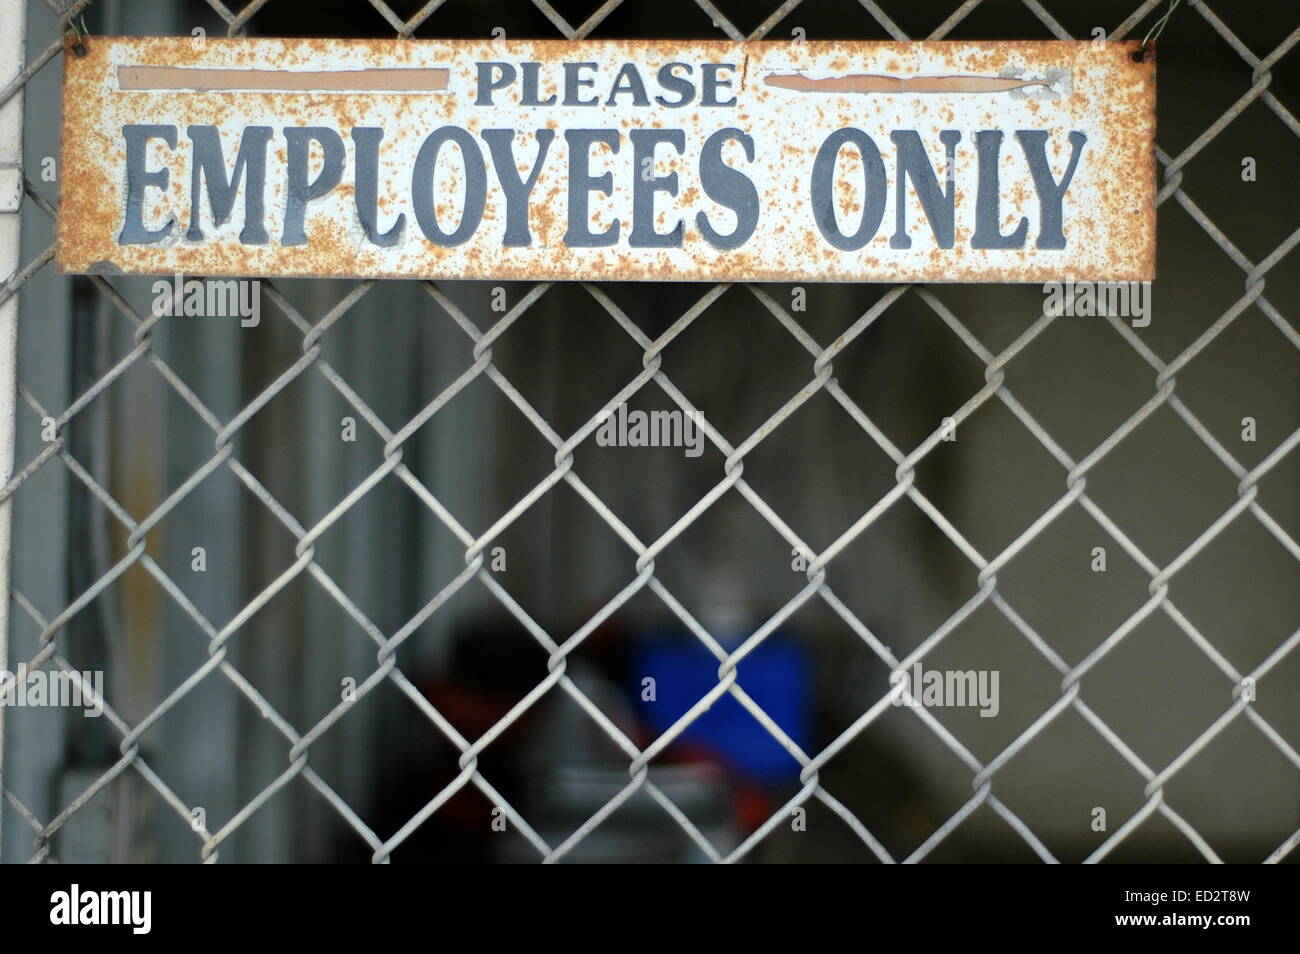 Employees Only Sign Stock Photo